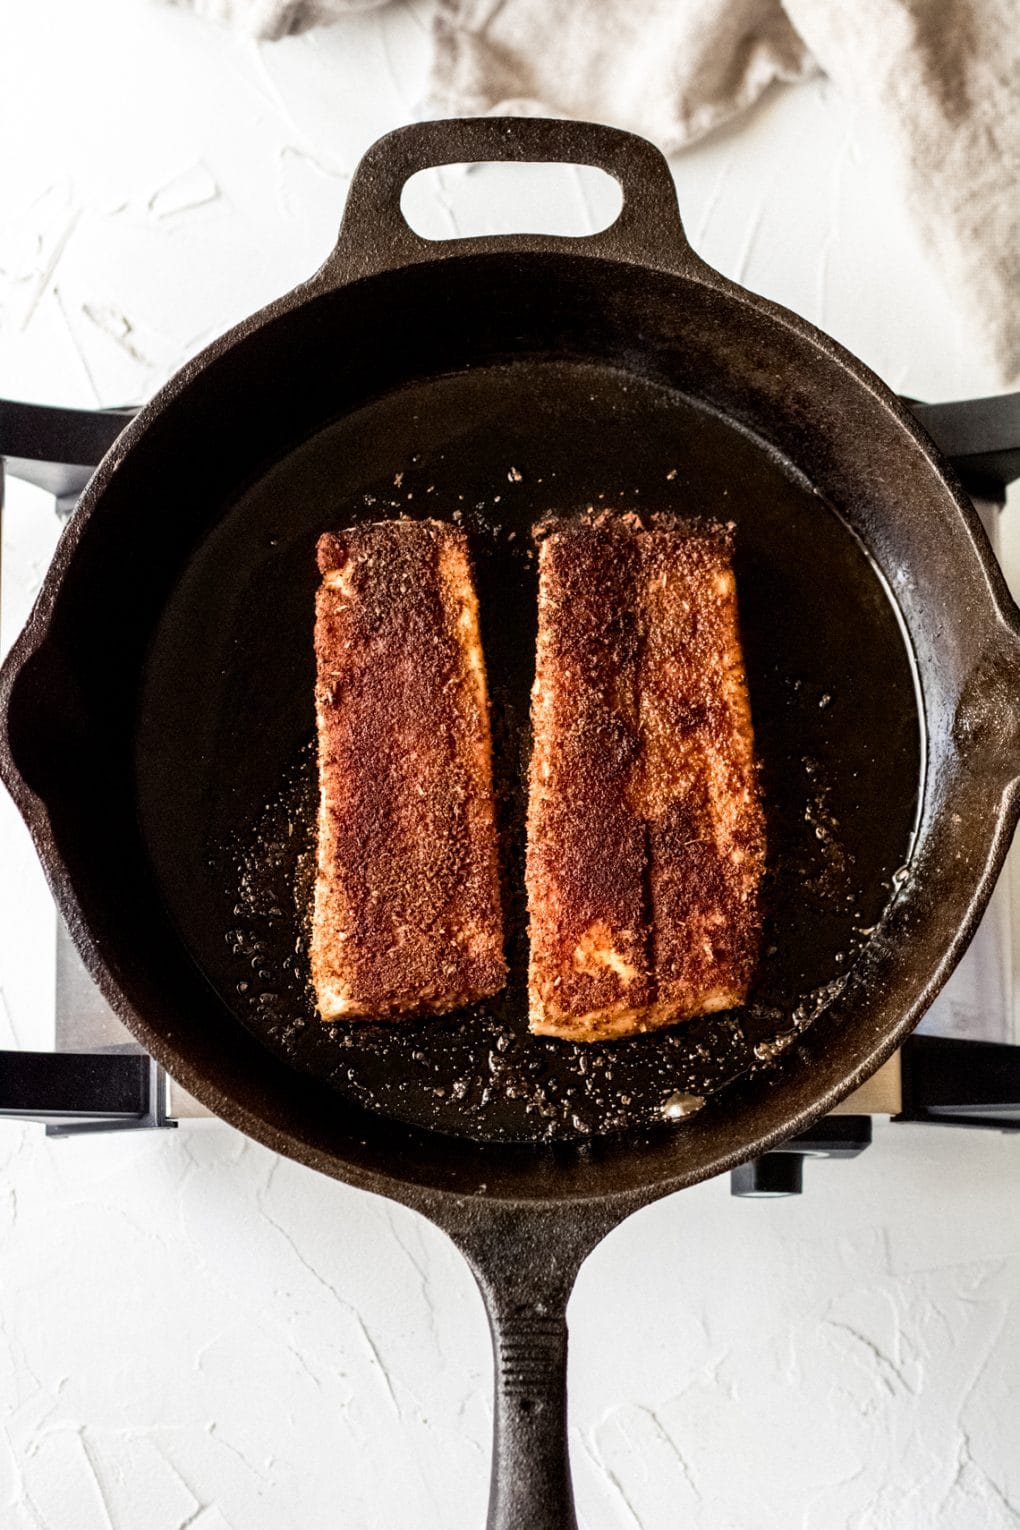 two Mahi mahi fillets cooking in a cast iron skillet